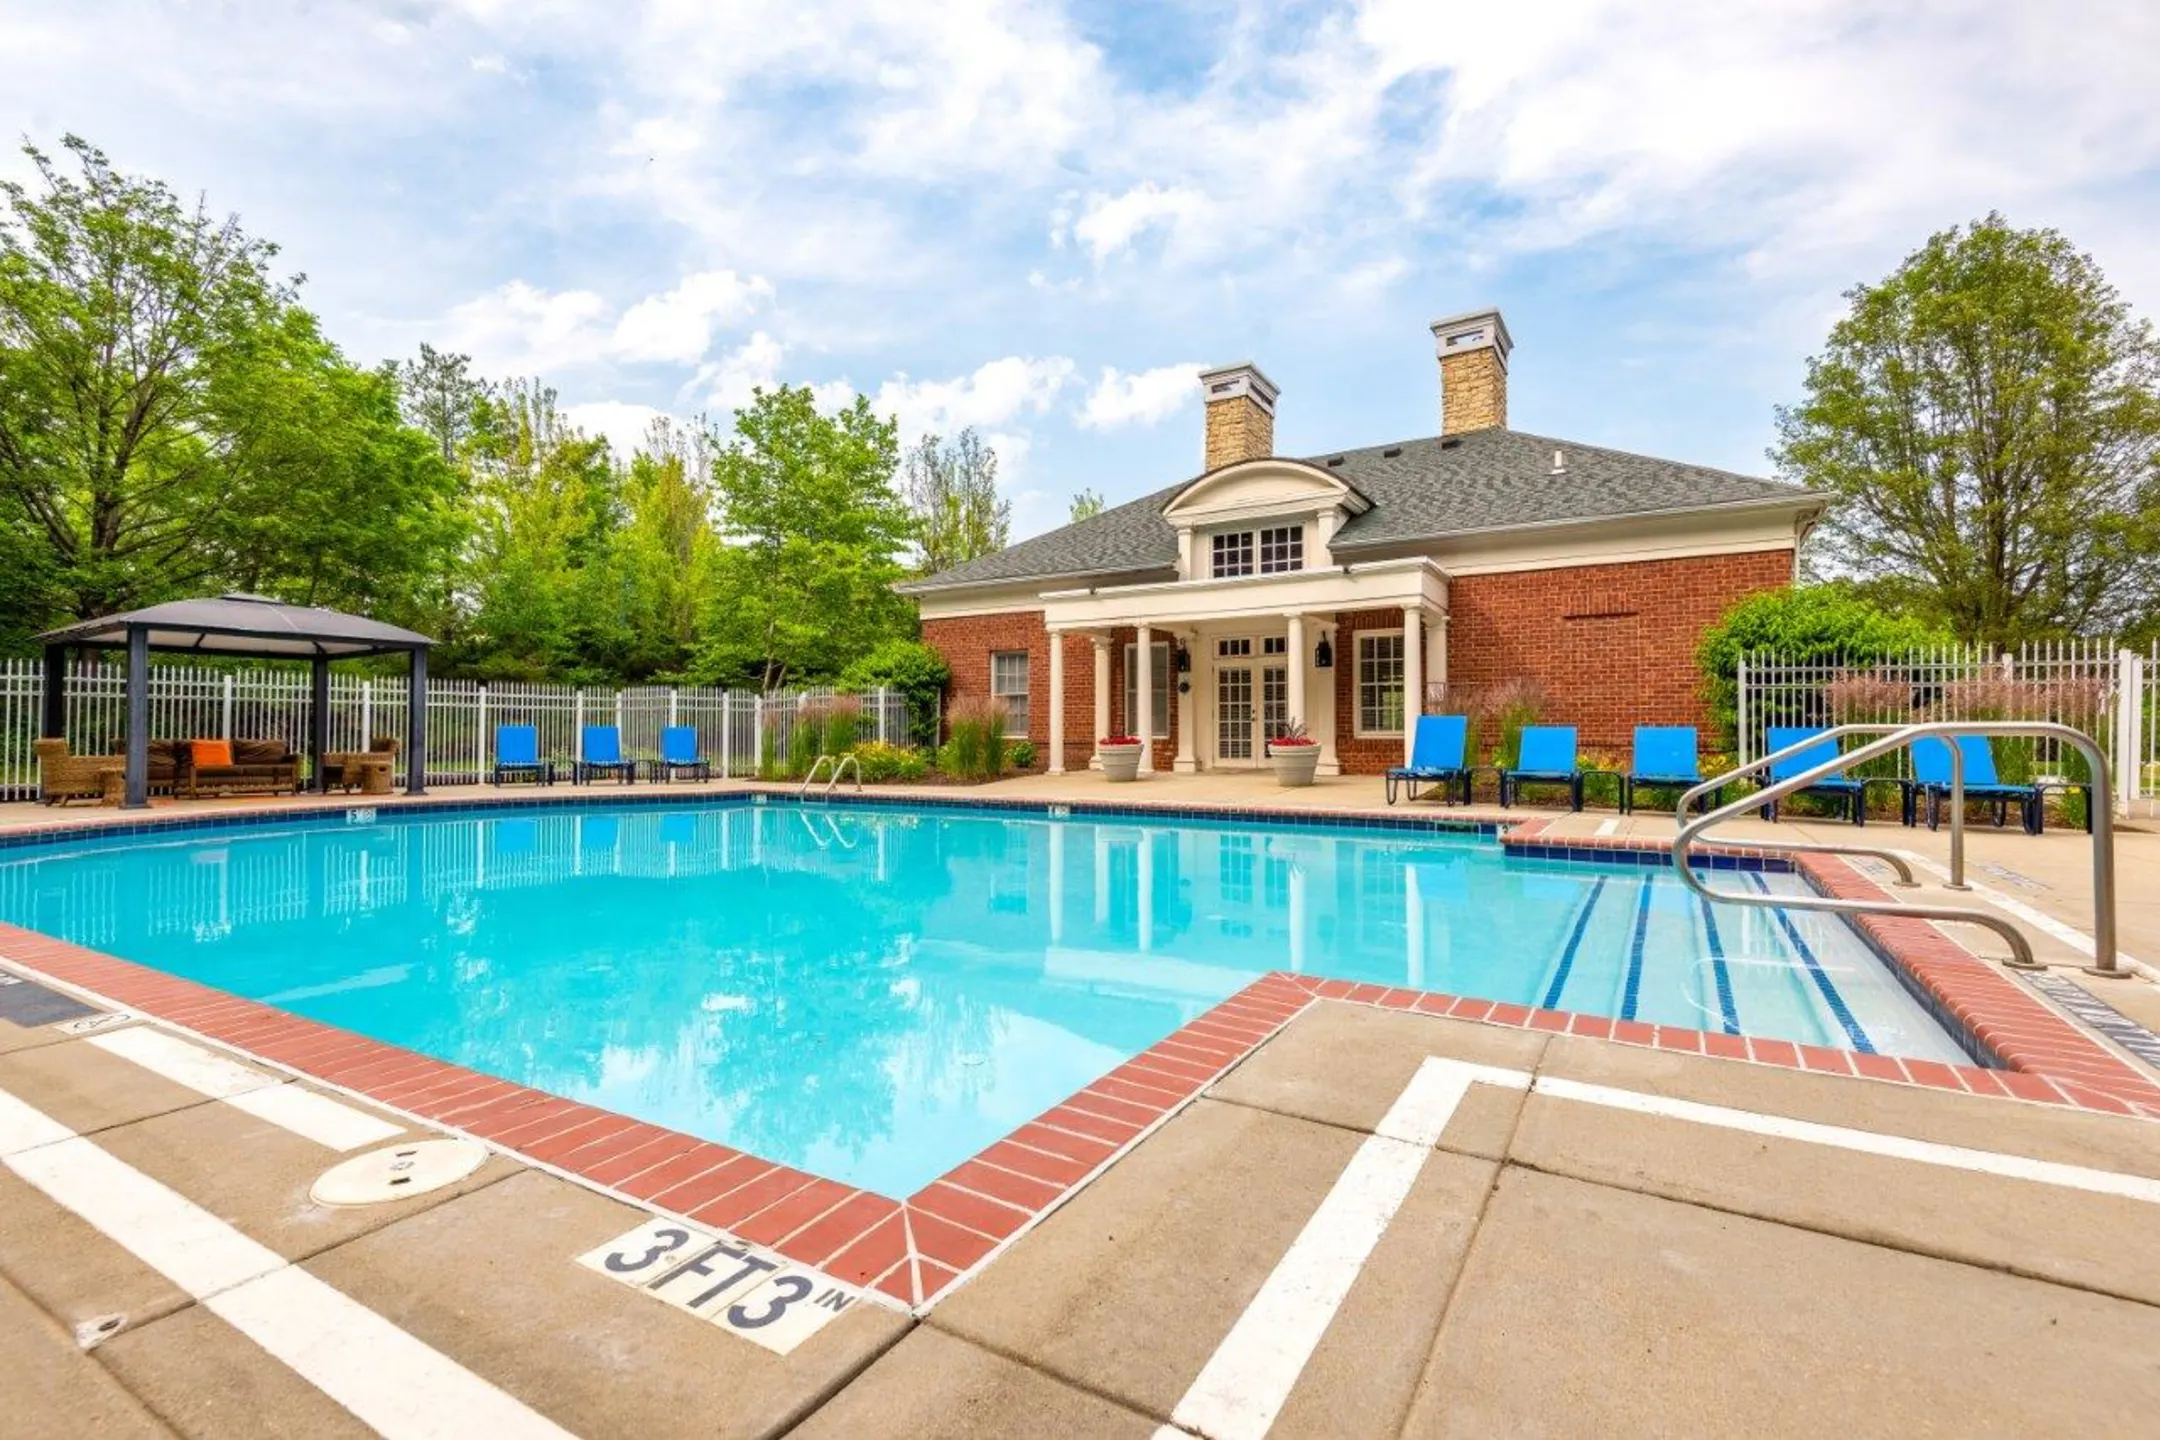 Pool - Christopher Wren Apartments - Wexford, PA